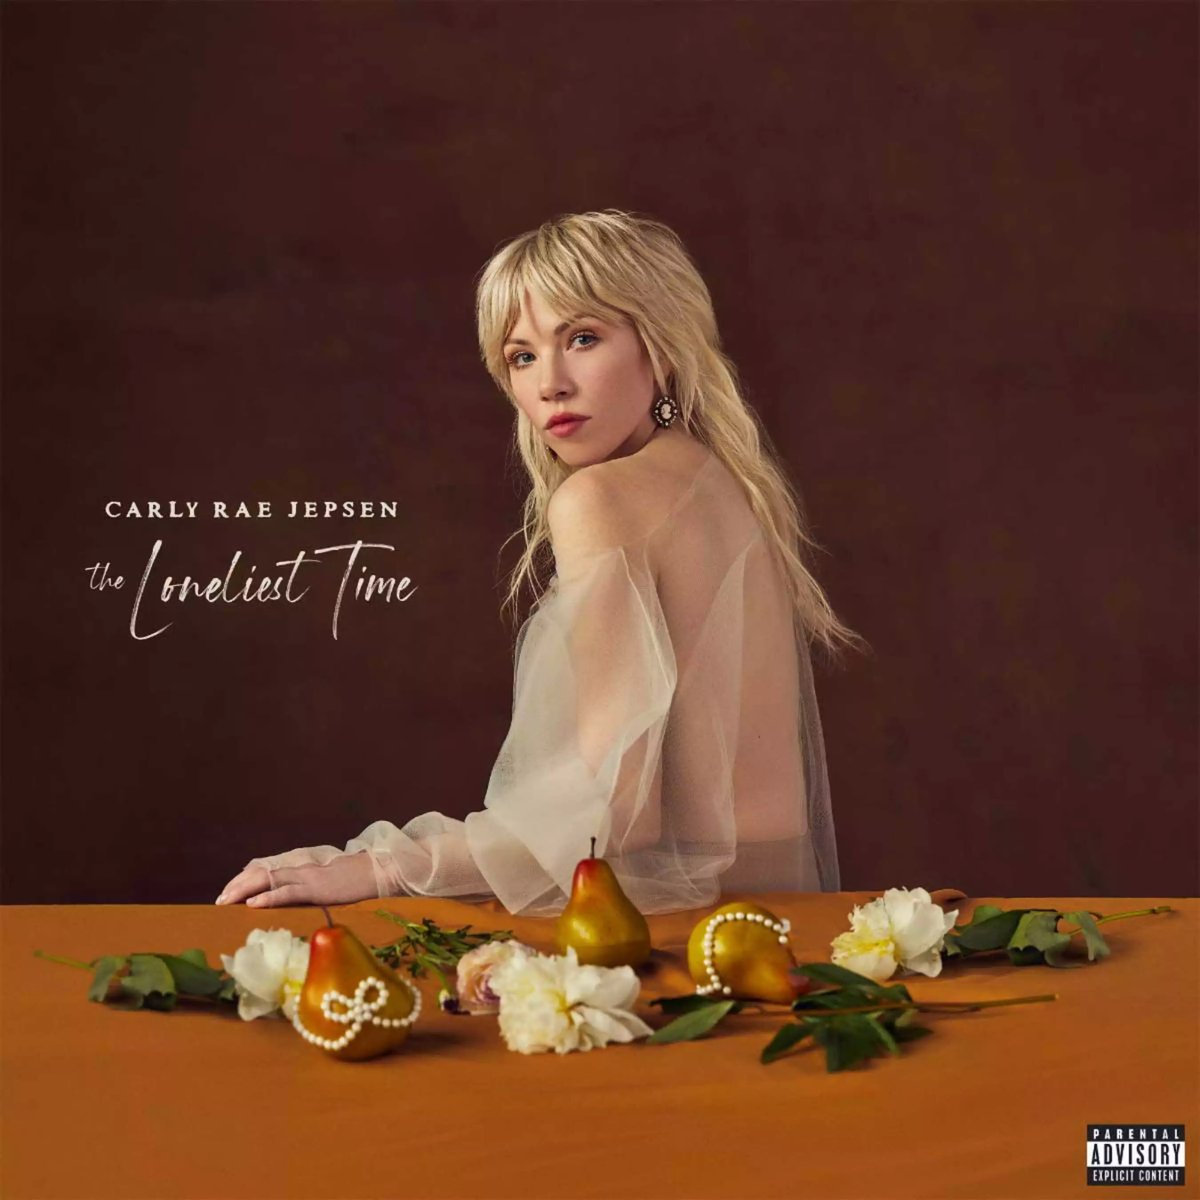 'The queen of writing from a place of both euphoric yearning and the ache of a broken heart, she’s never afraid to feel absolutely everything in her music.' Read our ⭐️⭐️⭐️⭐️ review of Carly Ray Jepsen (@carlyraejepsen) - 'The Loneliest Time' now: diymag.com/2022/10/21/car…